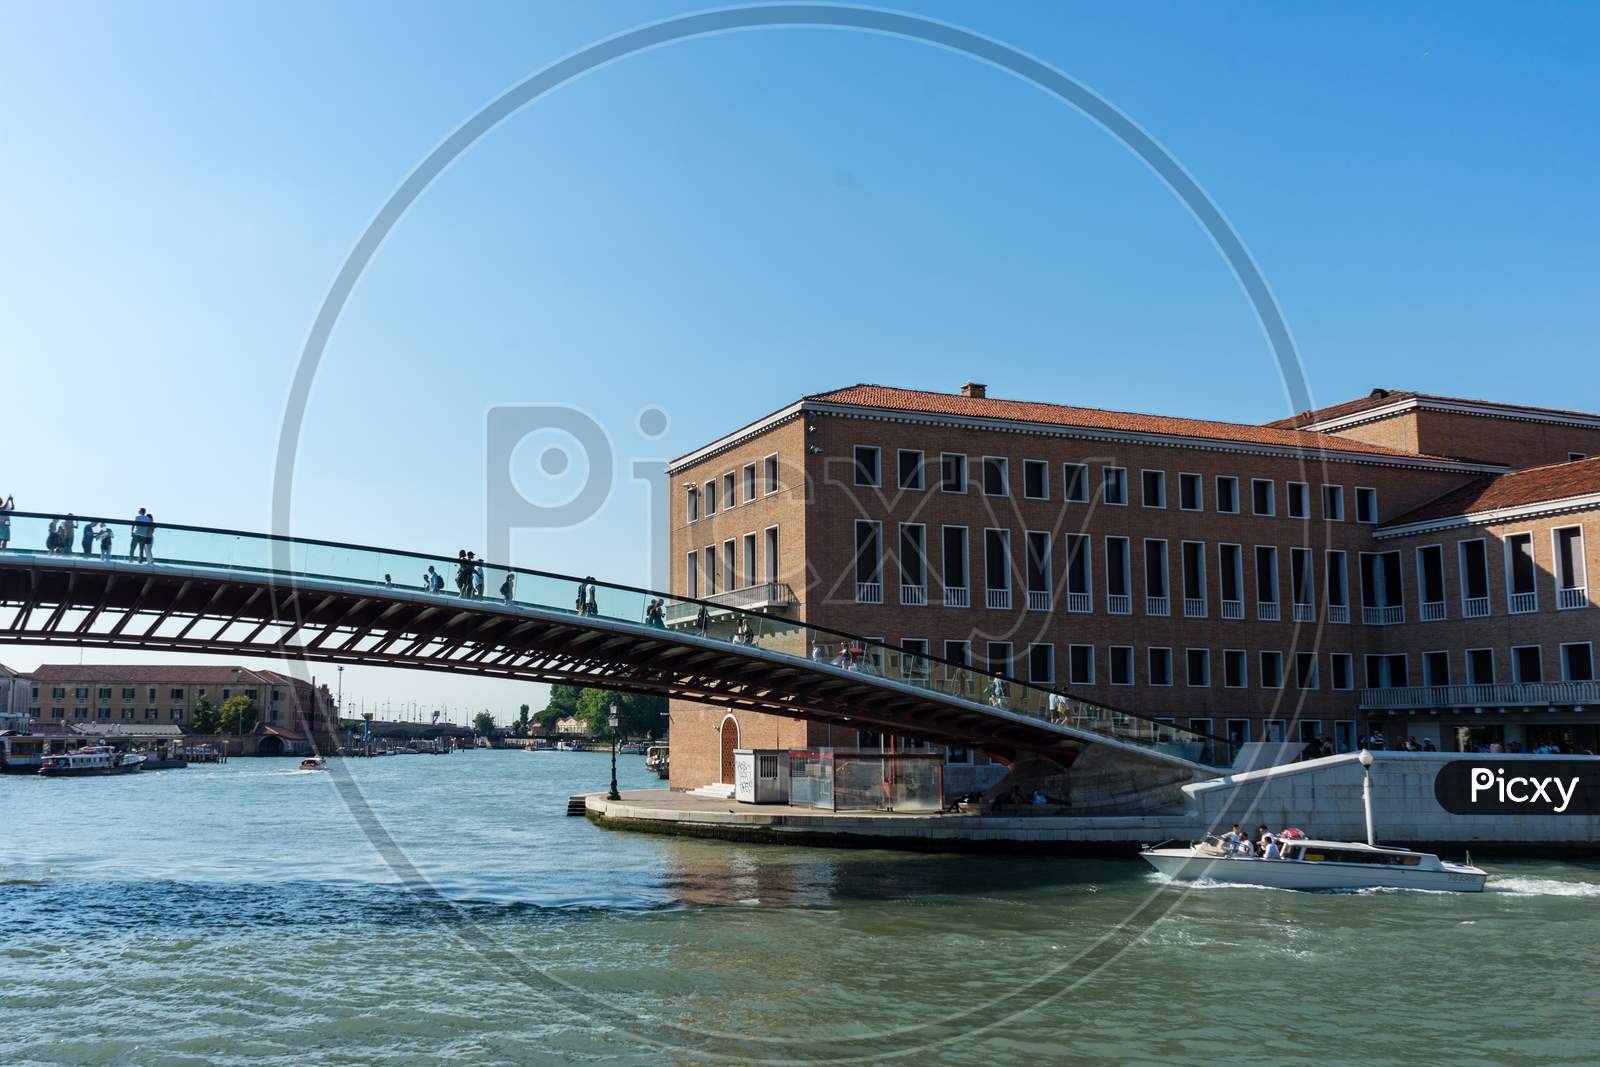 People Walking On The Bridge Over The Grand Canal In Venice, Italy